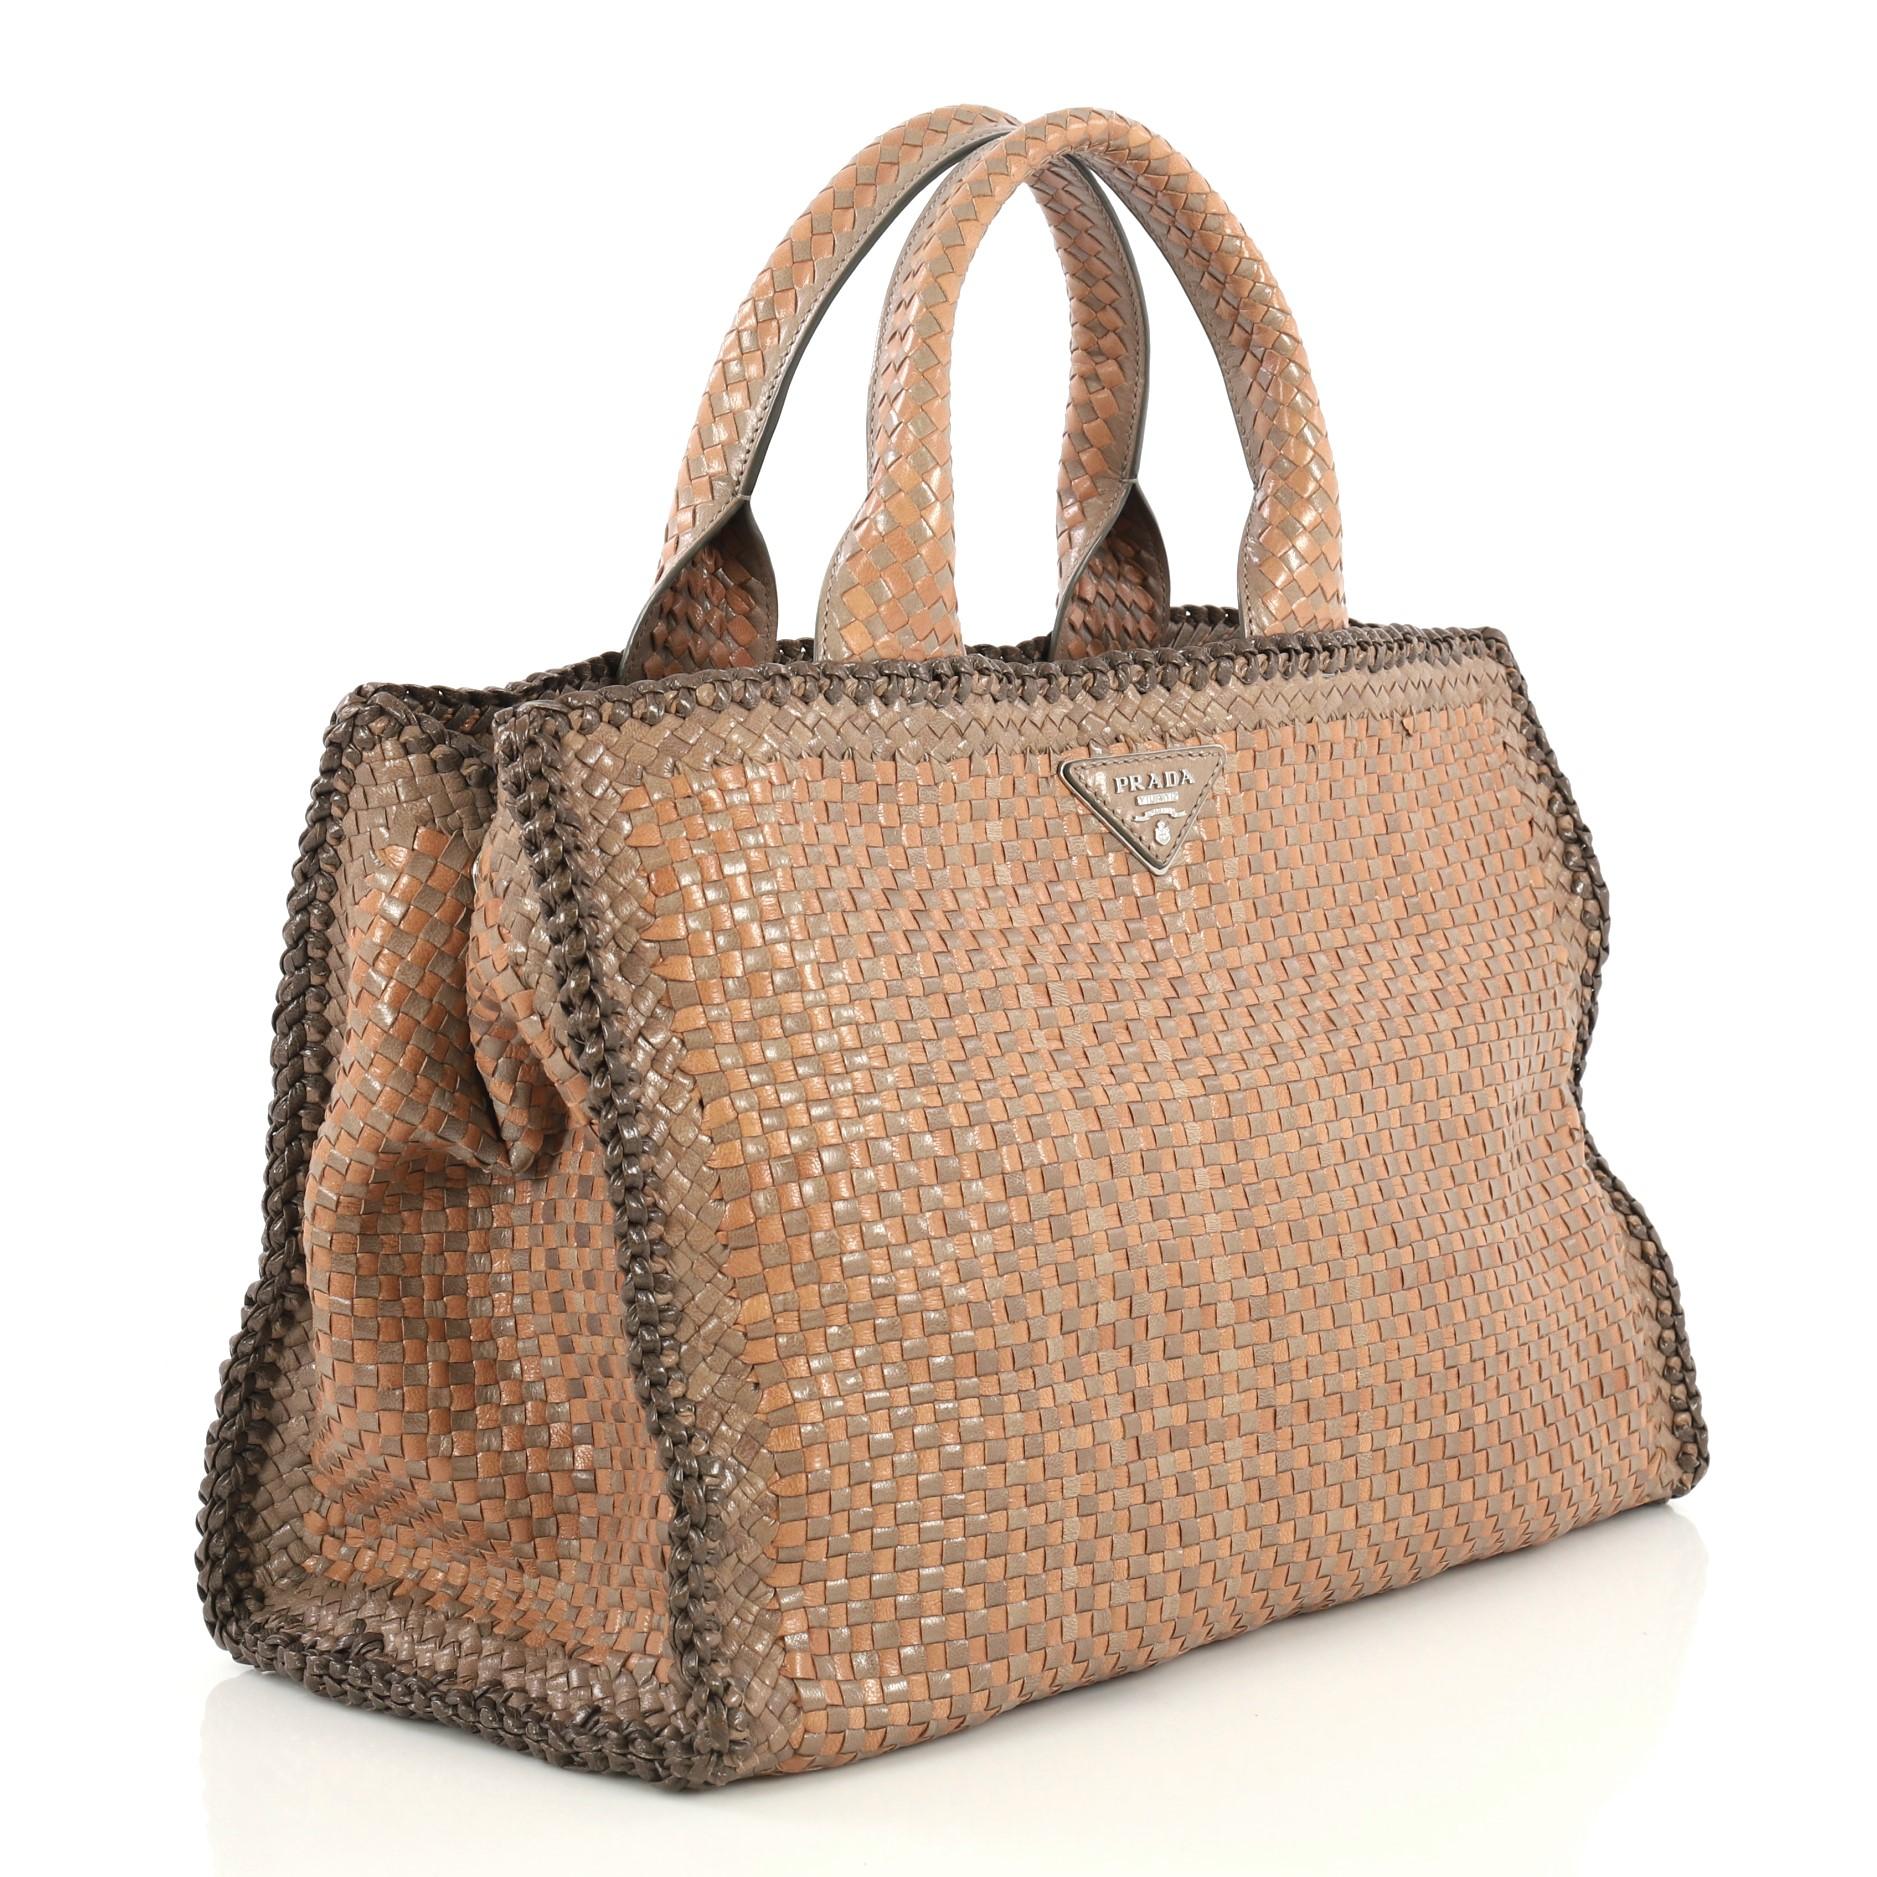 This Prada Convertible Open Tote Madras Woven Leather Medium, crafted in neutral madras woven leather, features dual top handles, Prada triangle logo on front, protective base studs, and silver-tone hardware. Its snap button closure opens to a gray